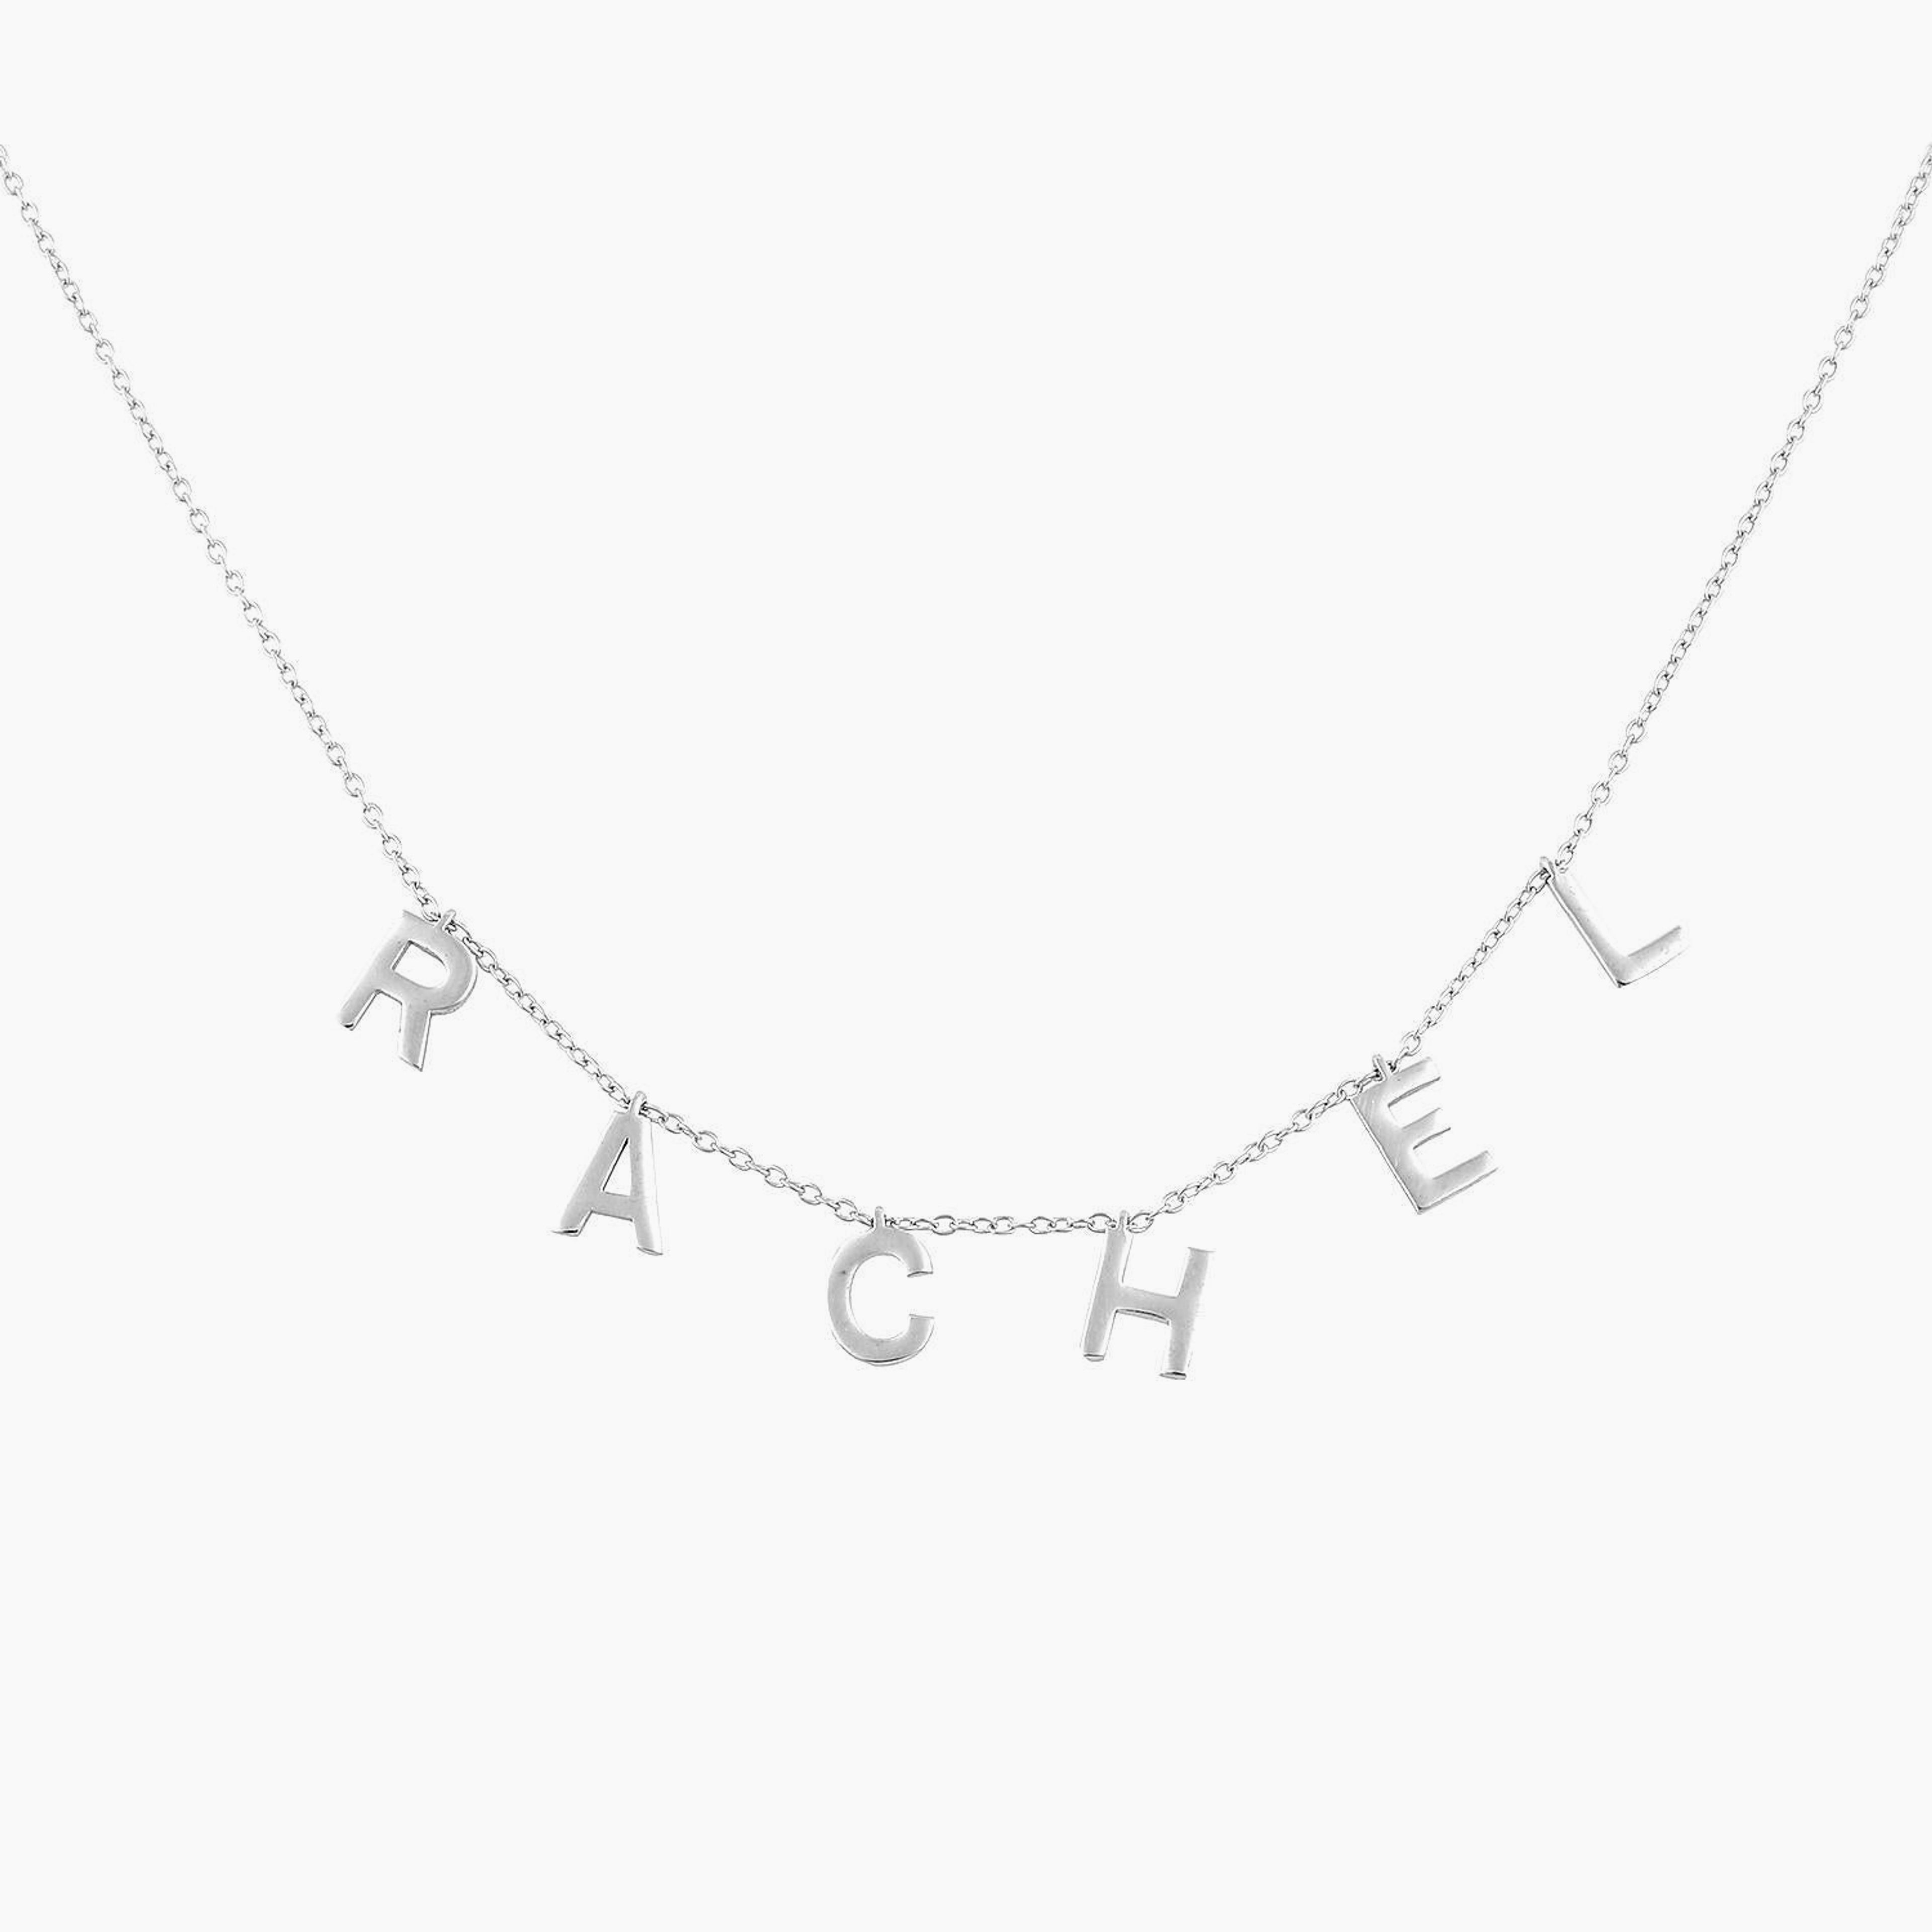 Dangling Name Necklace